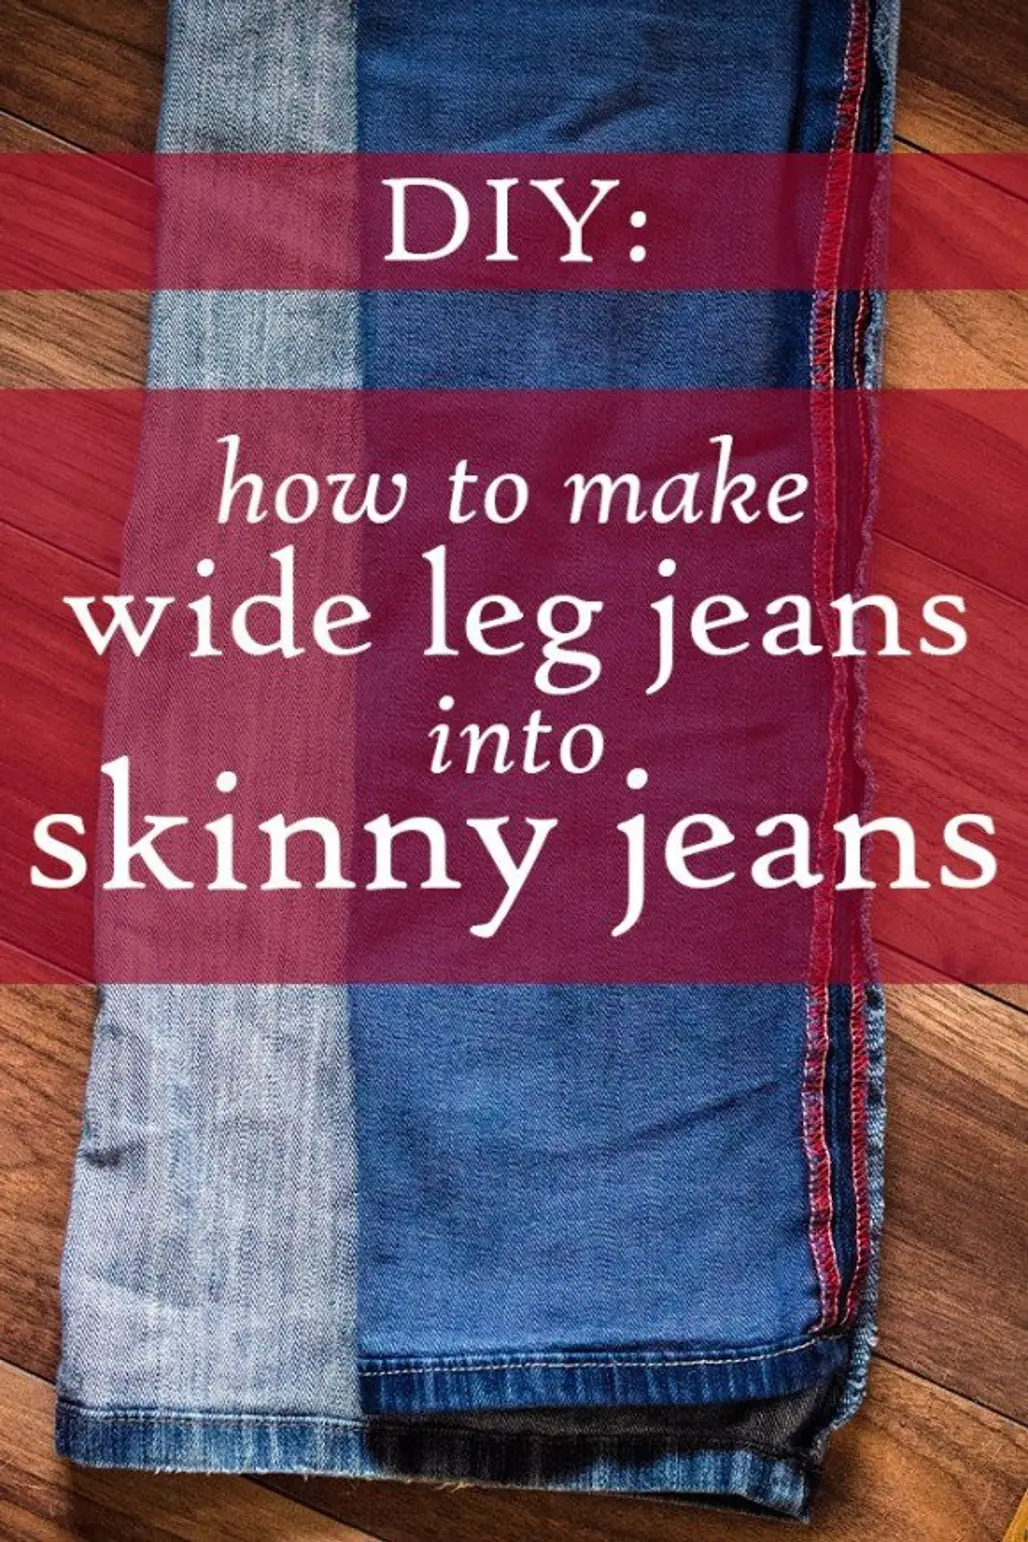 Convert Your Old Wide Legged Jeans into Skinny Jeans